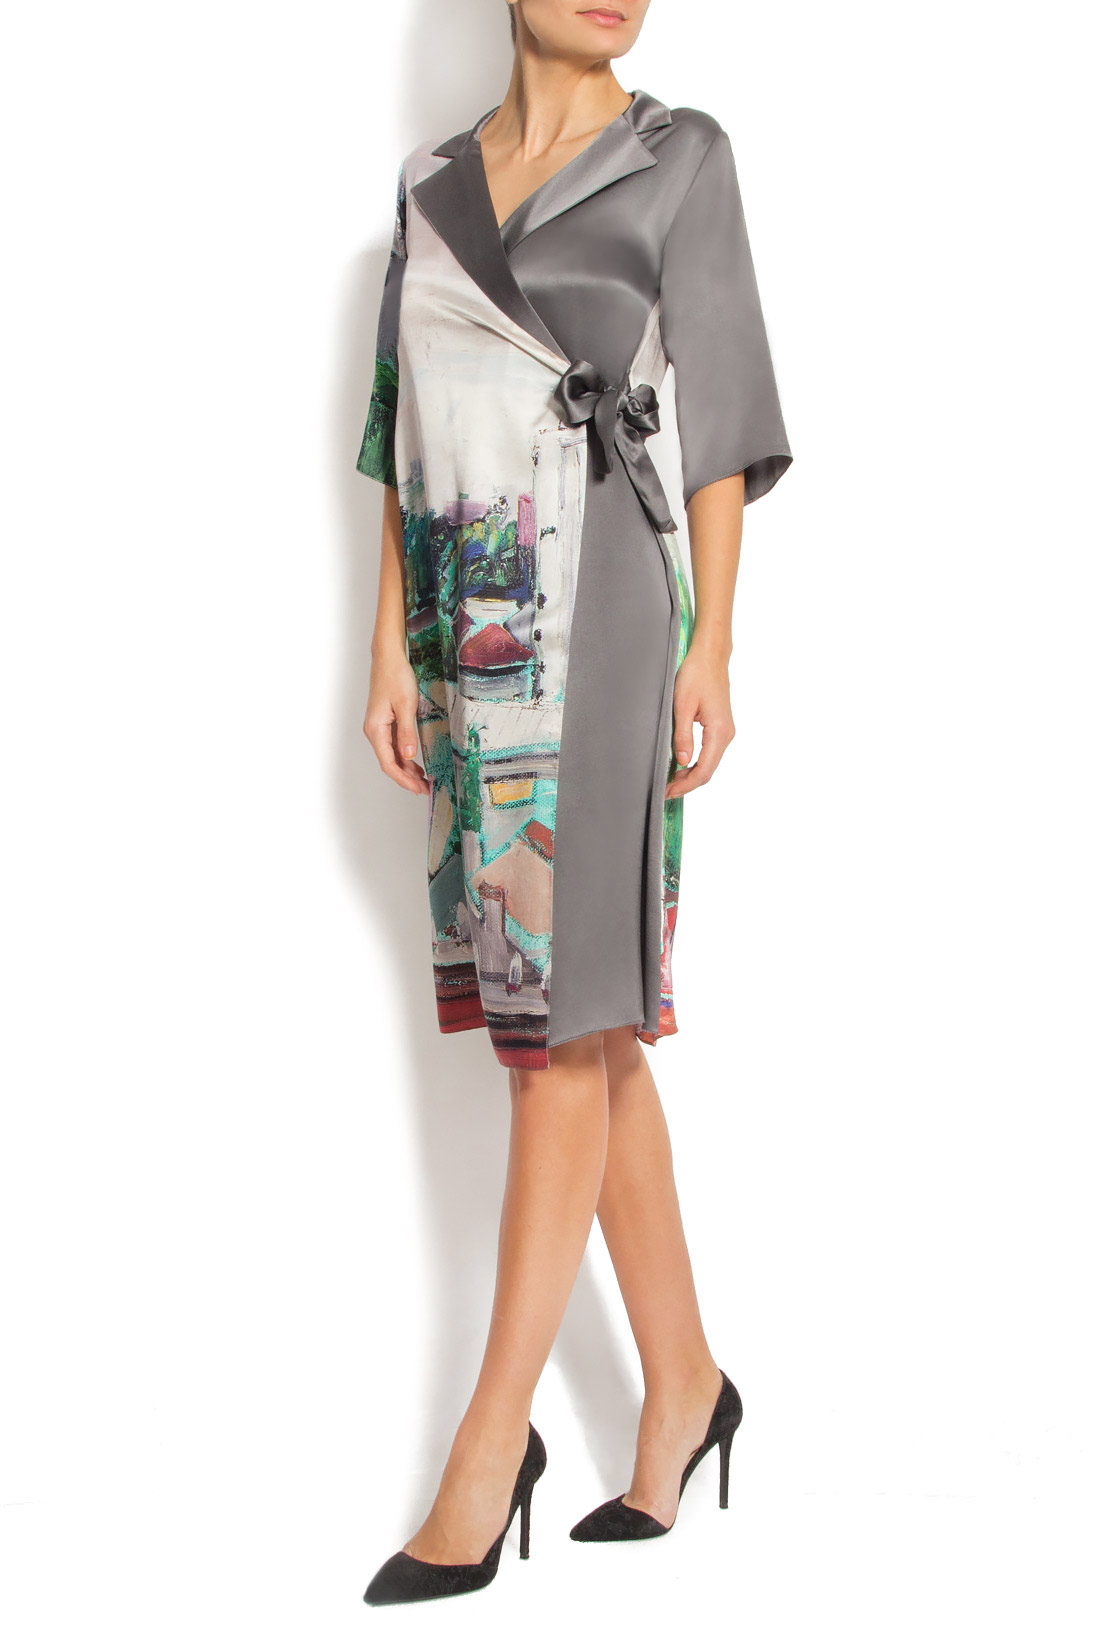 'Eclipsed City' printed silk wrap dress Argo by Andreea Buga image 1